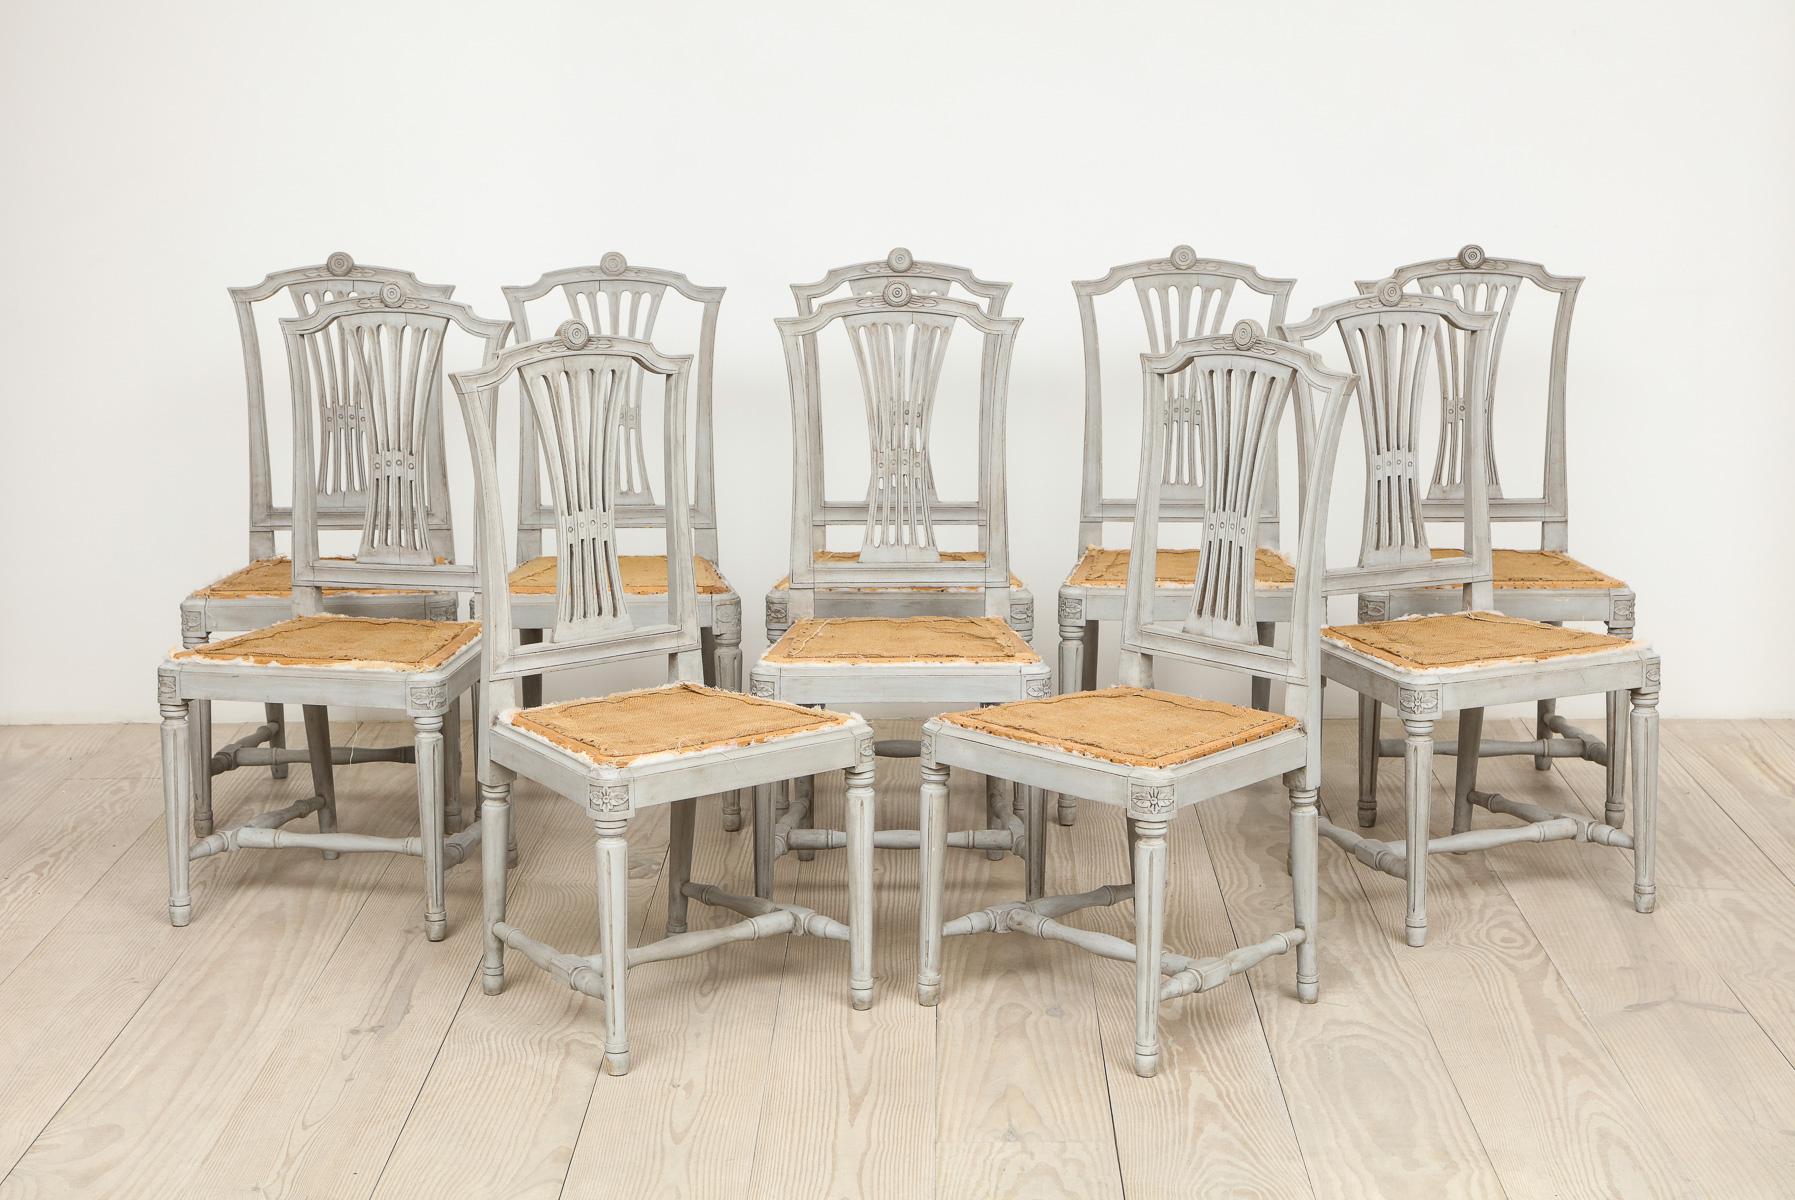 Swedish, 18th century Neo-classical Gustavian set of dining chairs with drop-in seats, set of 10, origin: Sweden, circa 1790.

The Gustavian, neoclassical period is characterized by a return to symmetry and straight lines, antique motifs such as